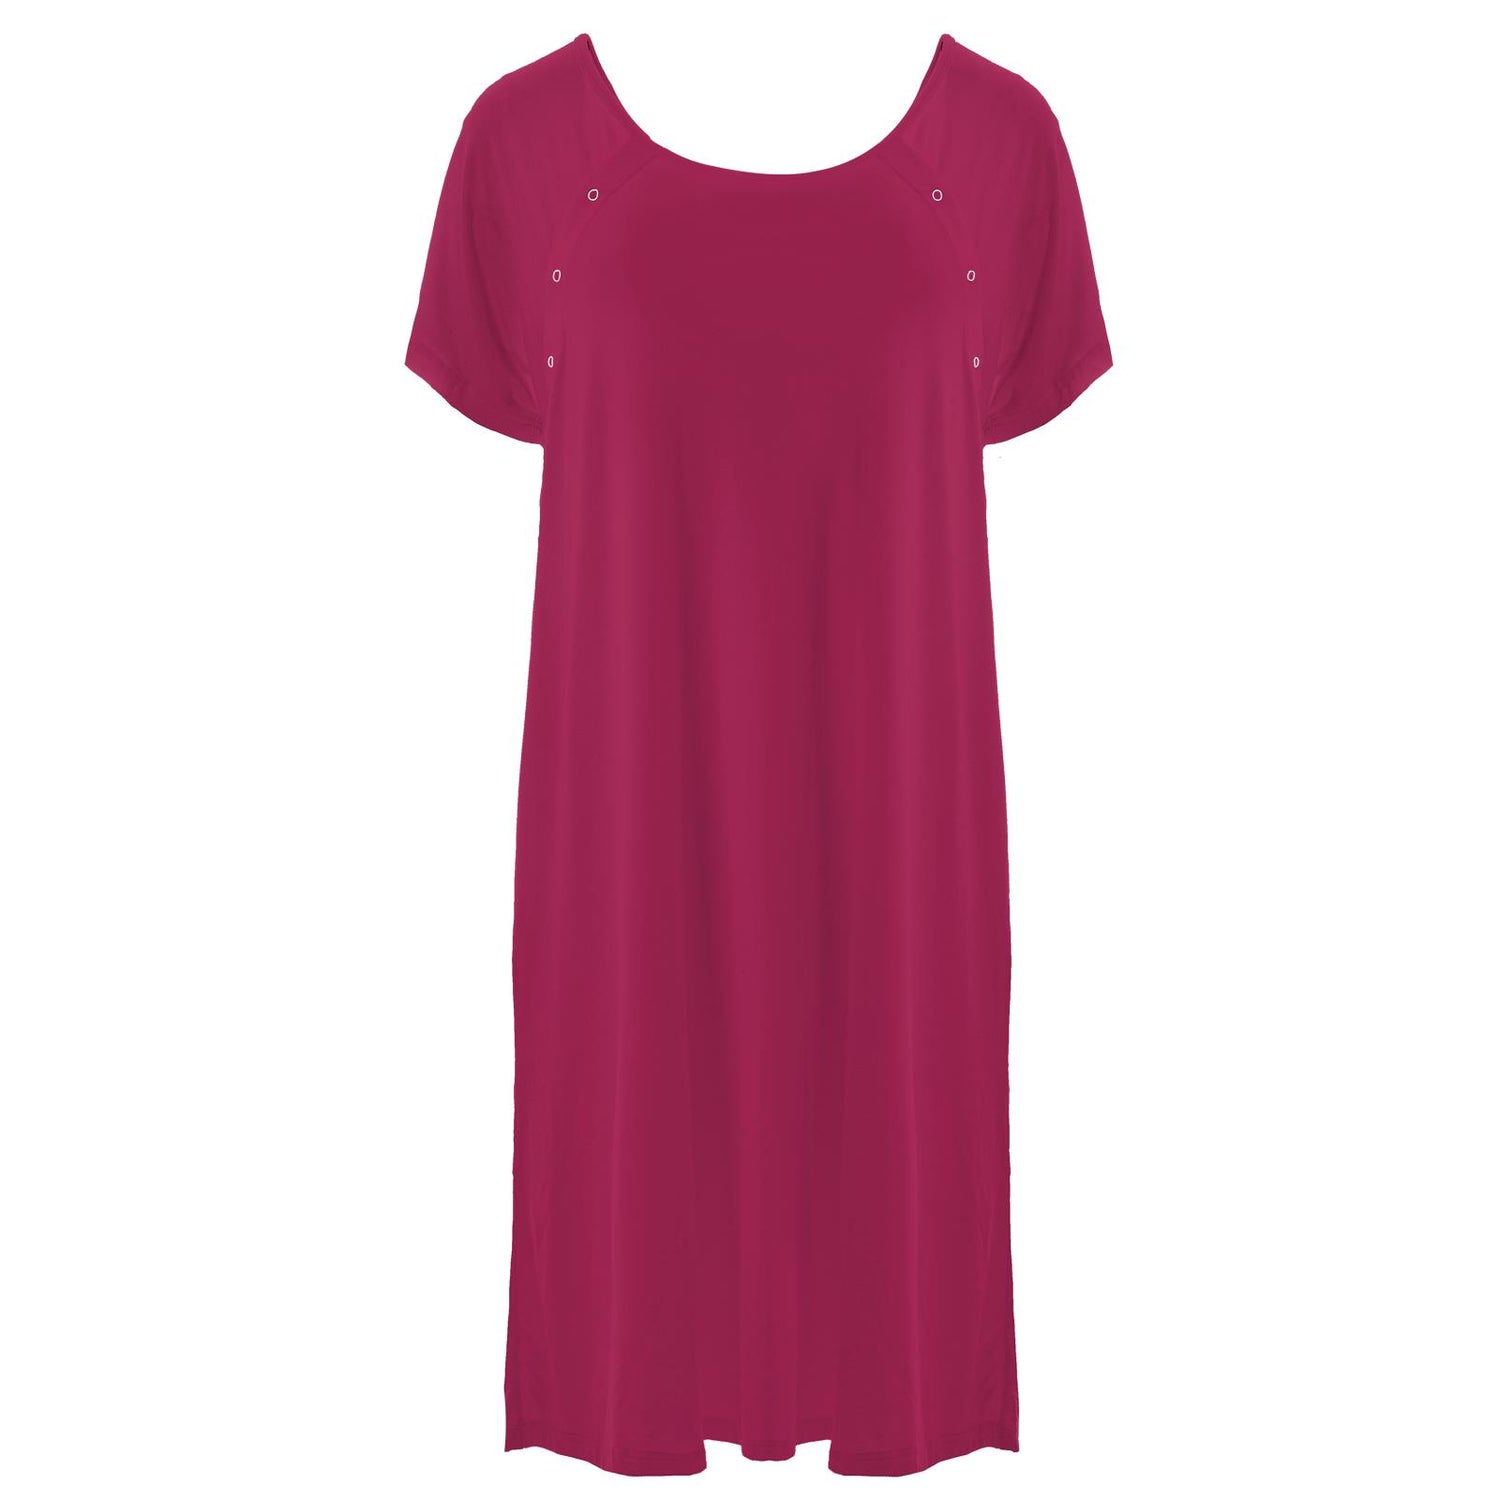 Women's Hospital Gown in Berry